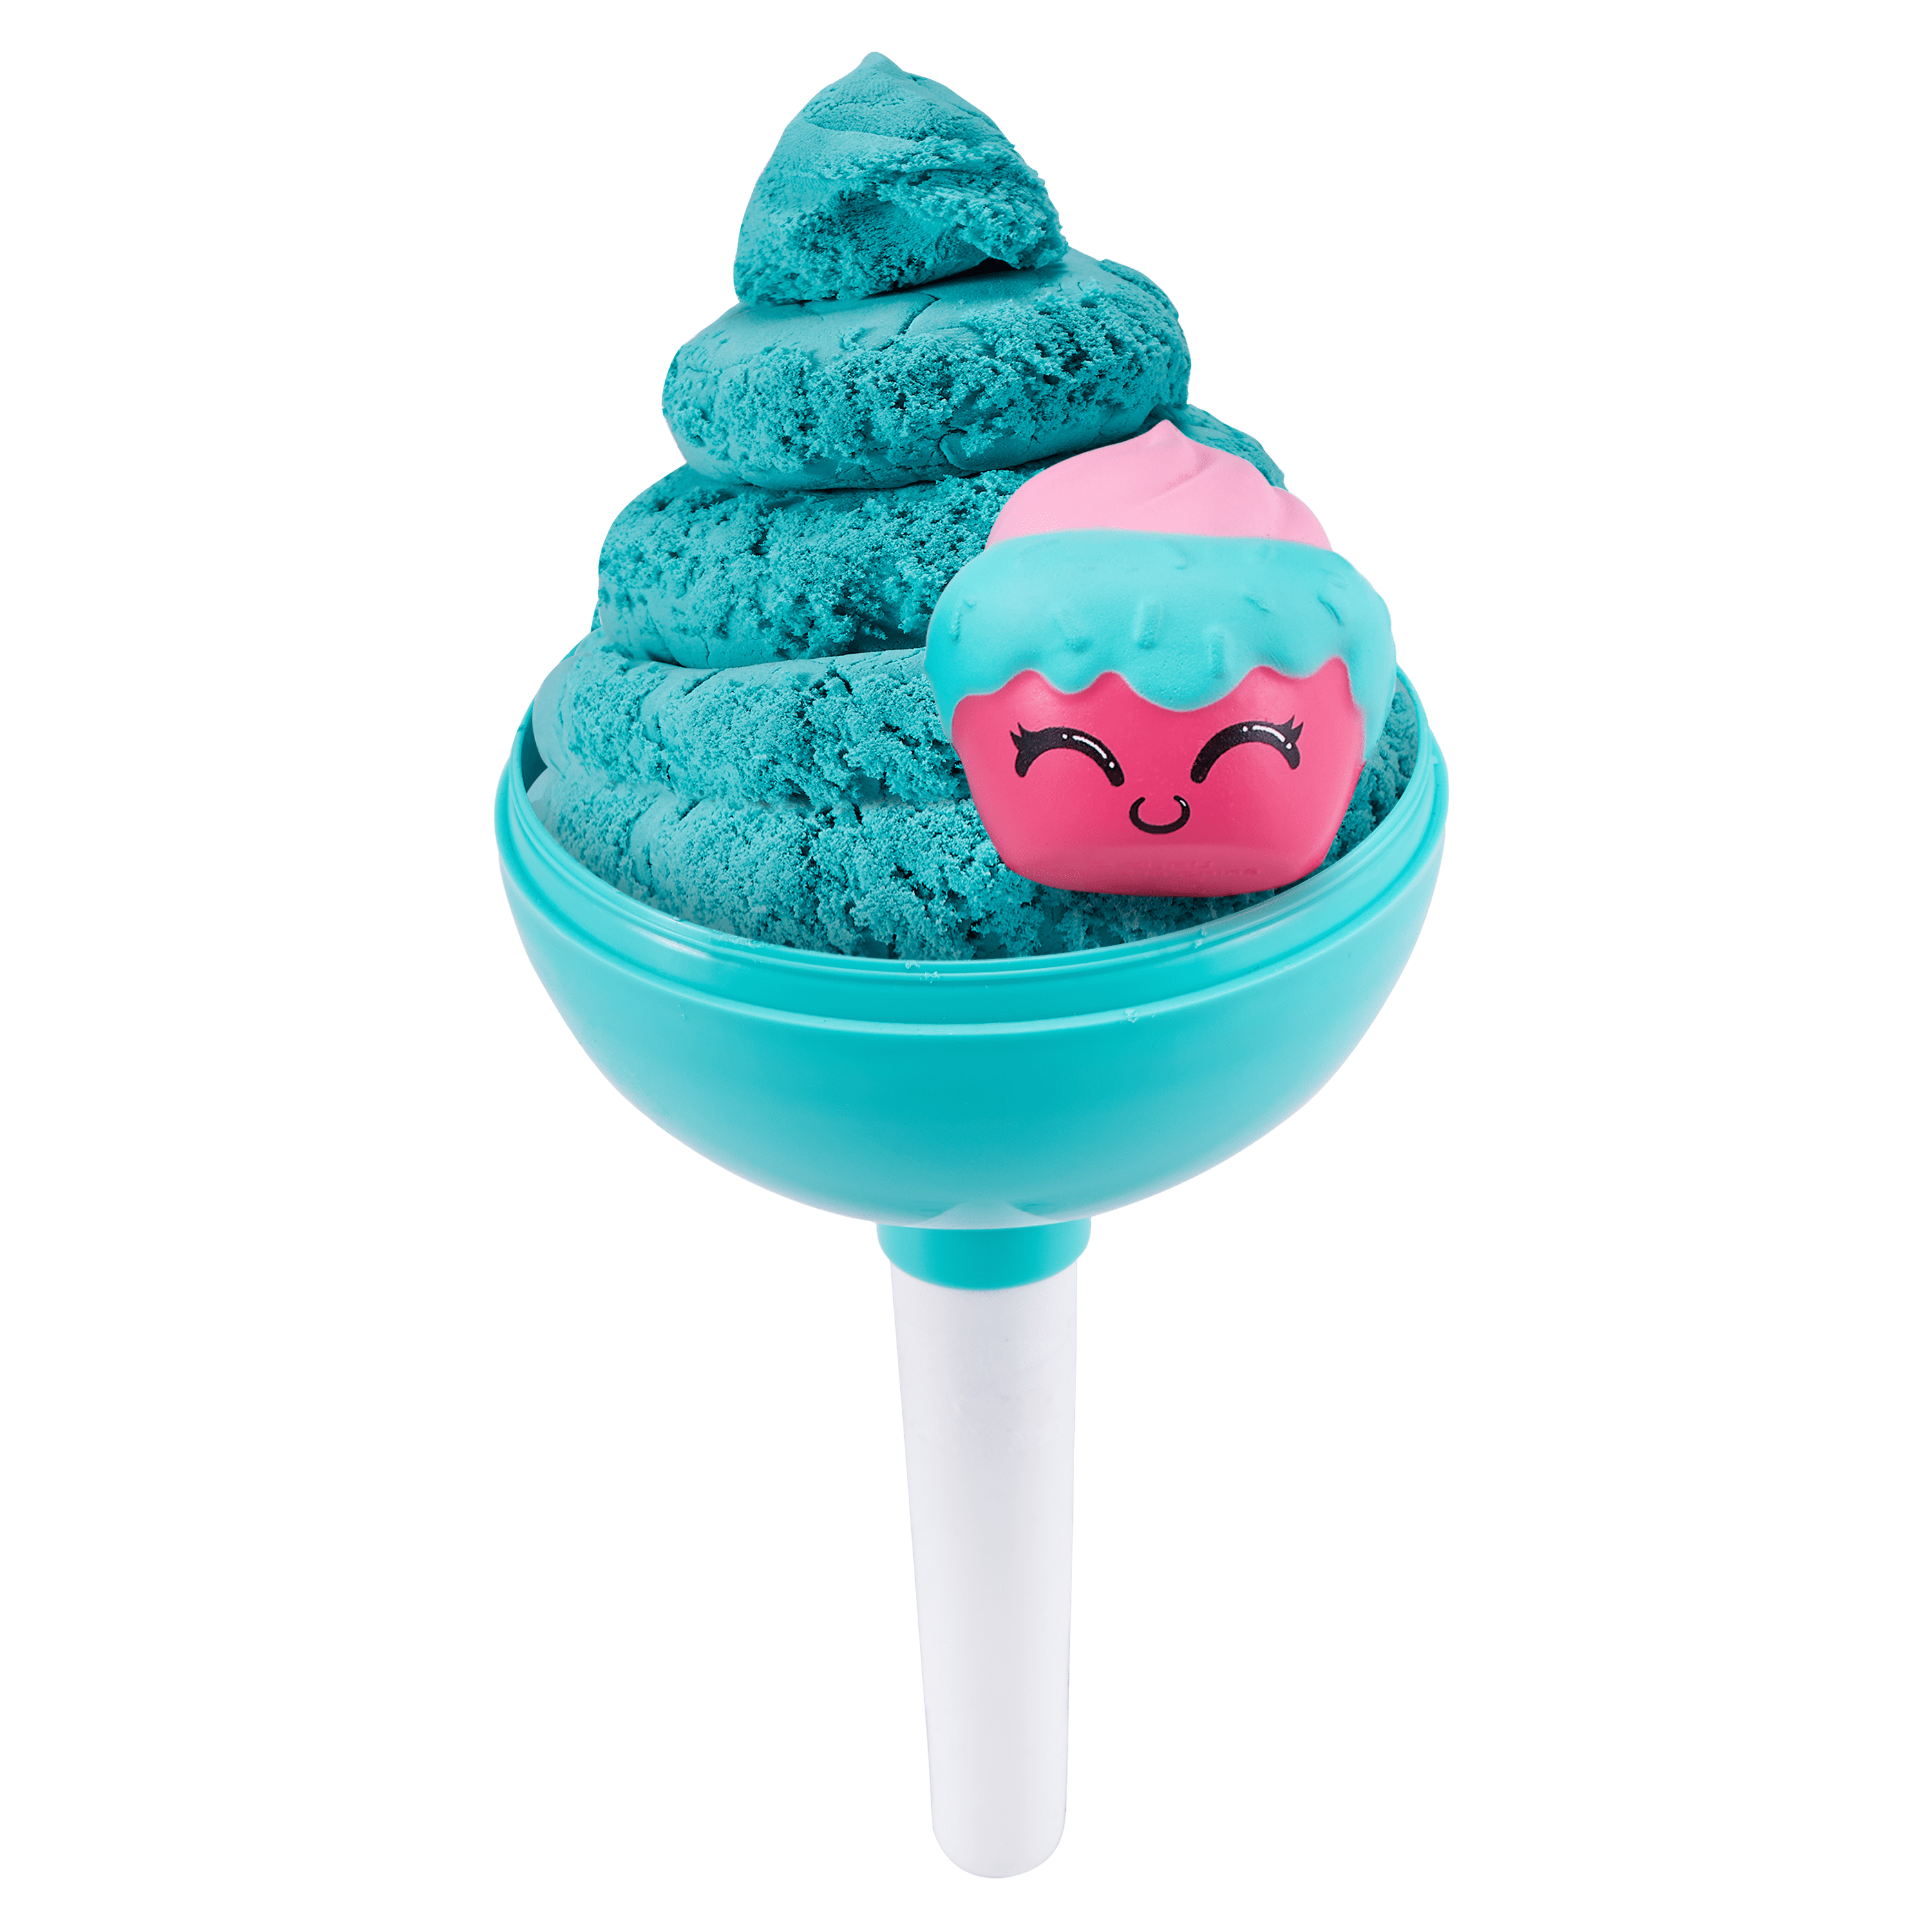 Cotton Candy Cuties игрушки. Эластичная масса